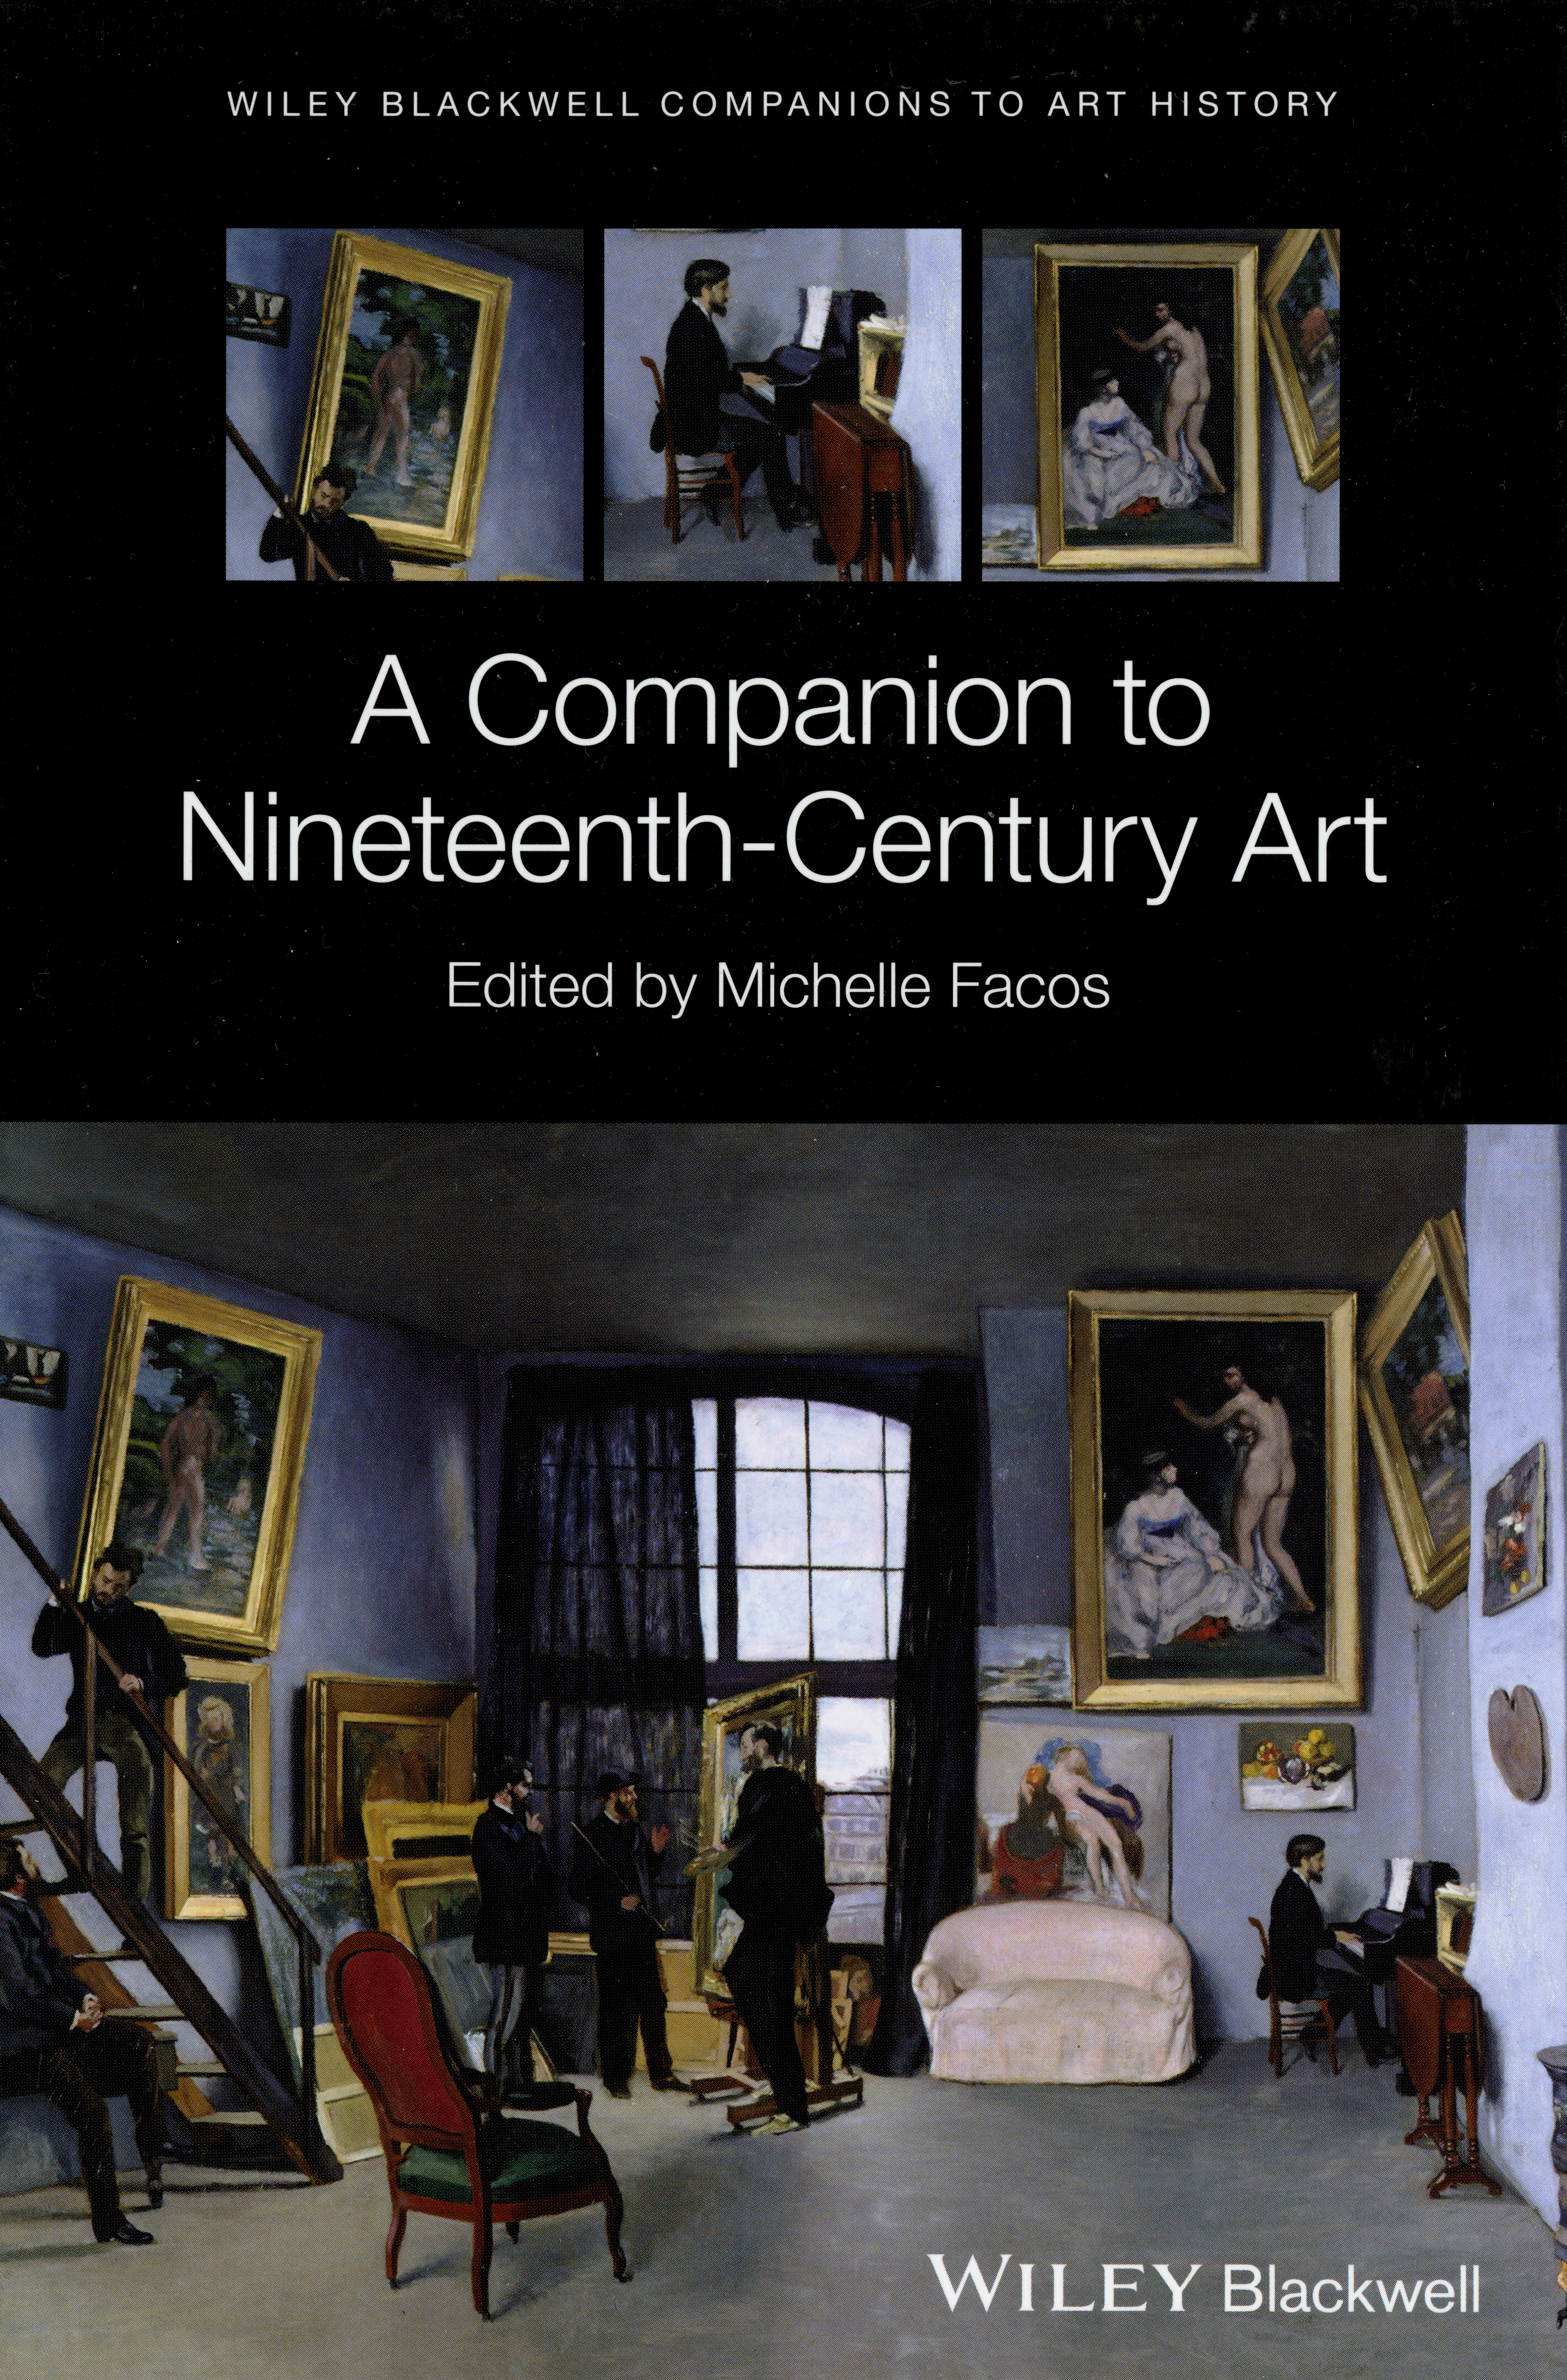 A Companion to Nineteenth-Century Art: From Revolution to World War